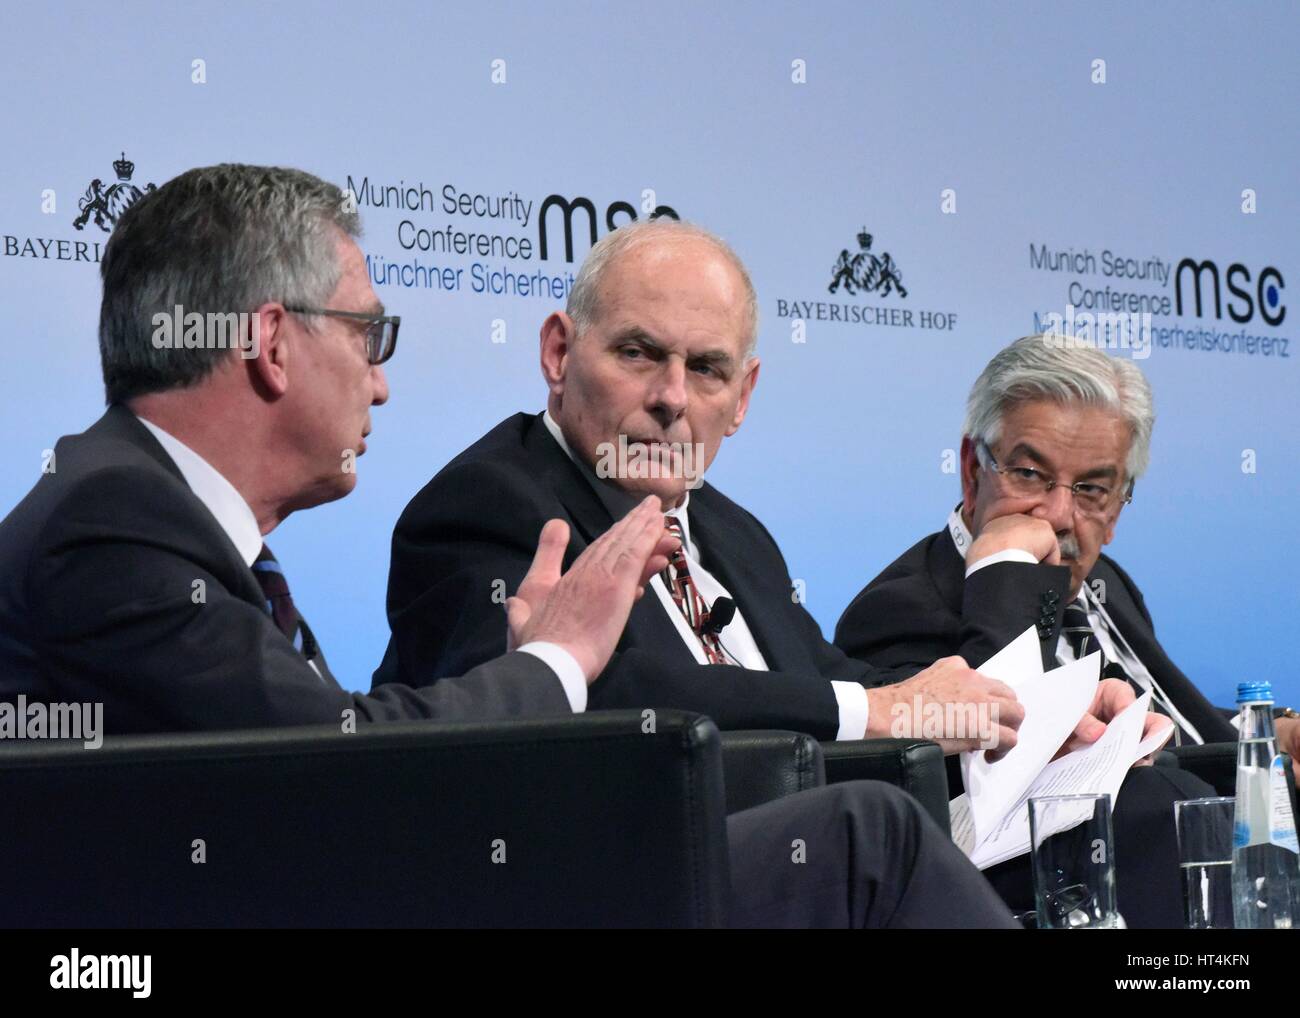 German Federal Minister of the Interior Thomas de Maiziere (left), U.S. Homeland Security Secretary John Kelly, and Pakistani Minister of Defense Khawaja Muhammad Asif participate in a global forum discussion during the 2017 Munich Security Conference February 18, 2017 in Munich, Germany. Stock Photo